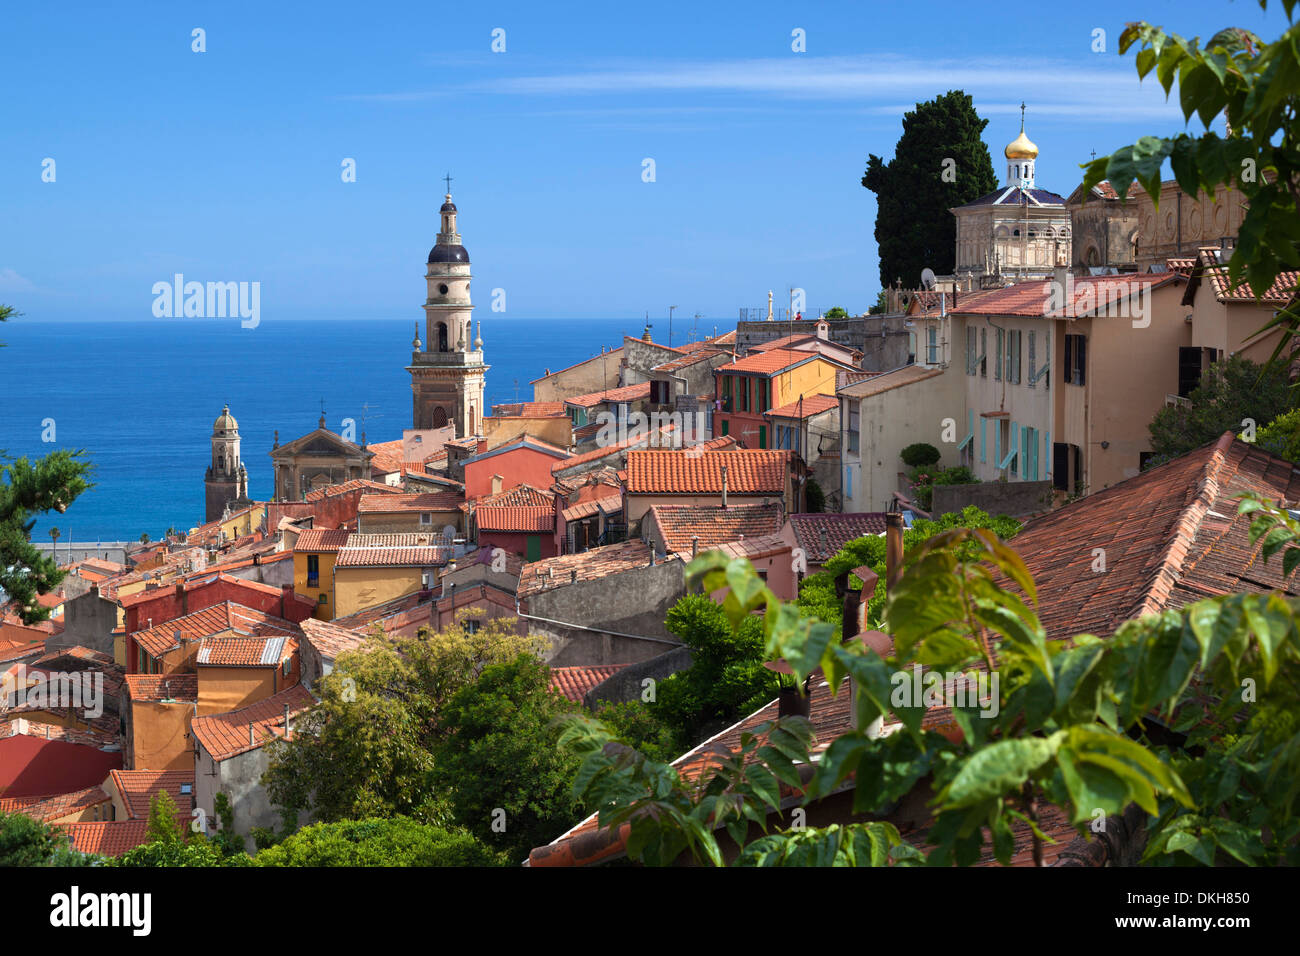 View over old town and port, Menton, Provence-Alpes-Cote d'Azur, Provence, France, Mediterranean, Europe Stock Photo